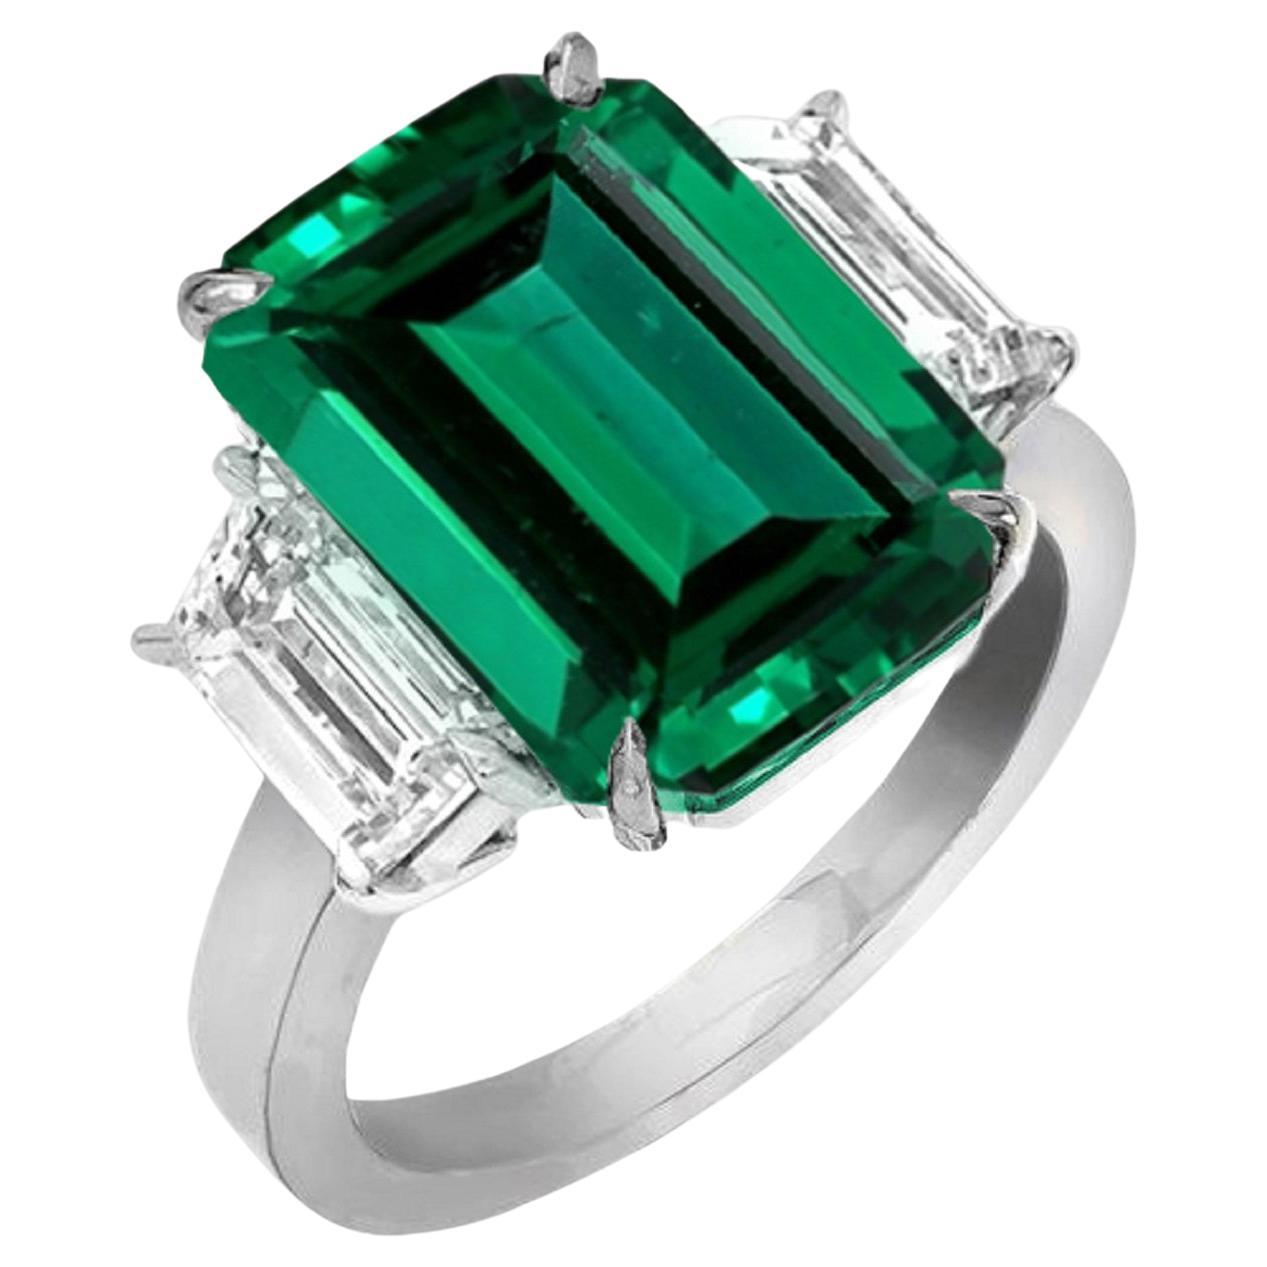 Handmade in Italy GIA Certified 4 Carat Green Emerald Diamond Platinum Ring For Sale